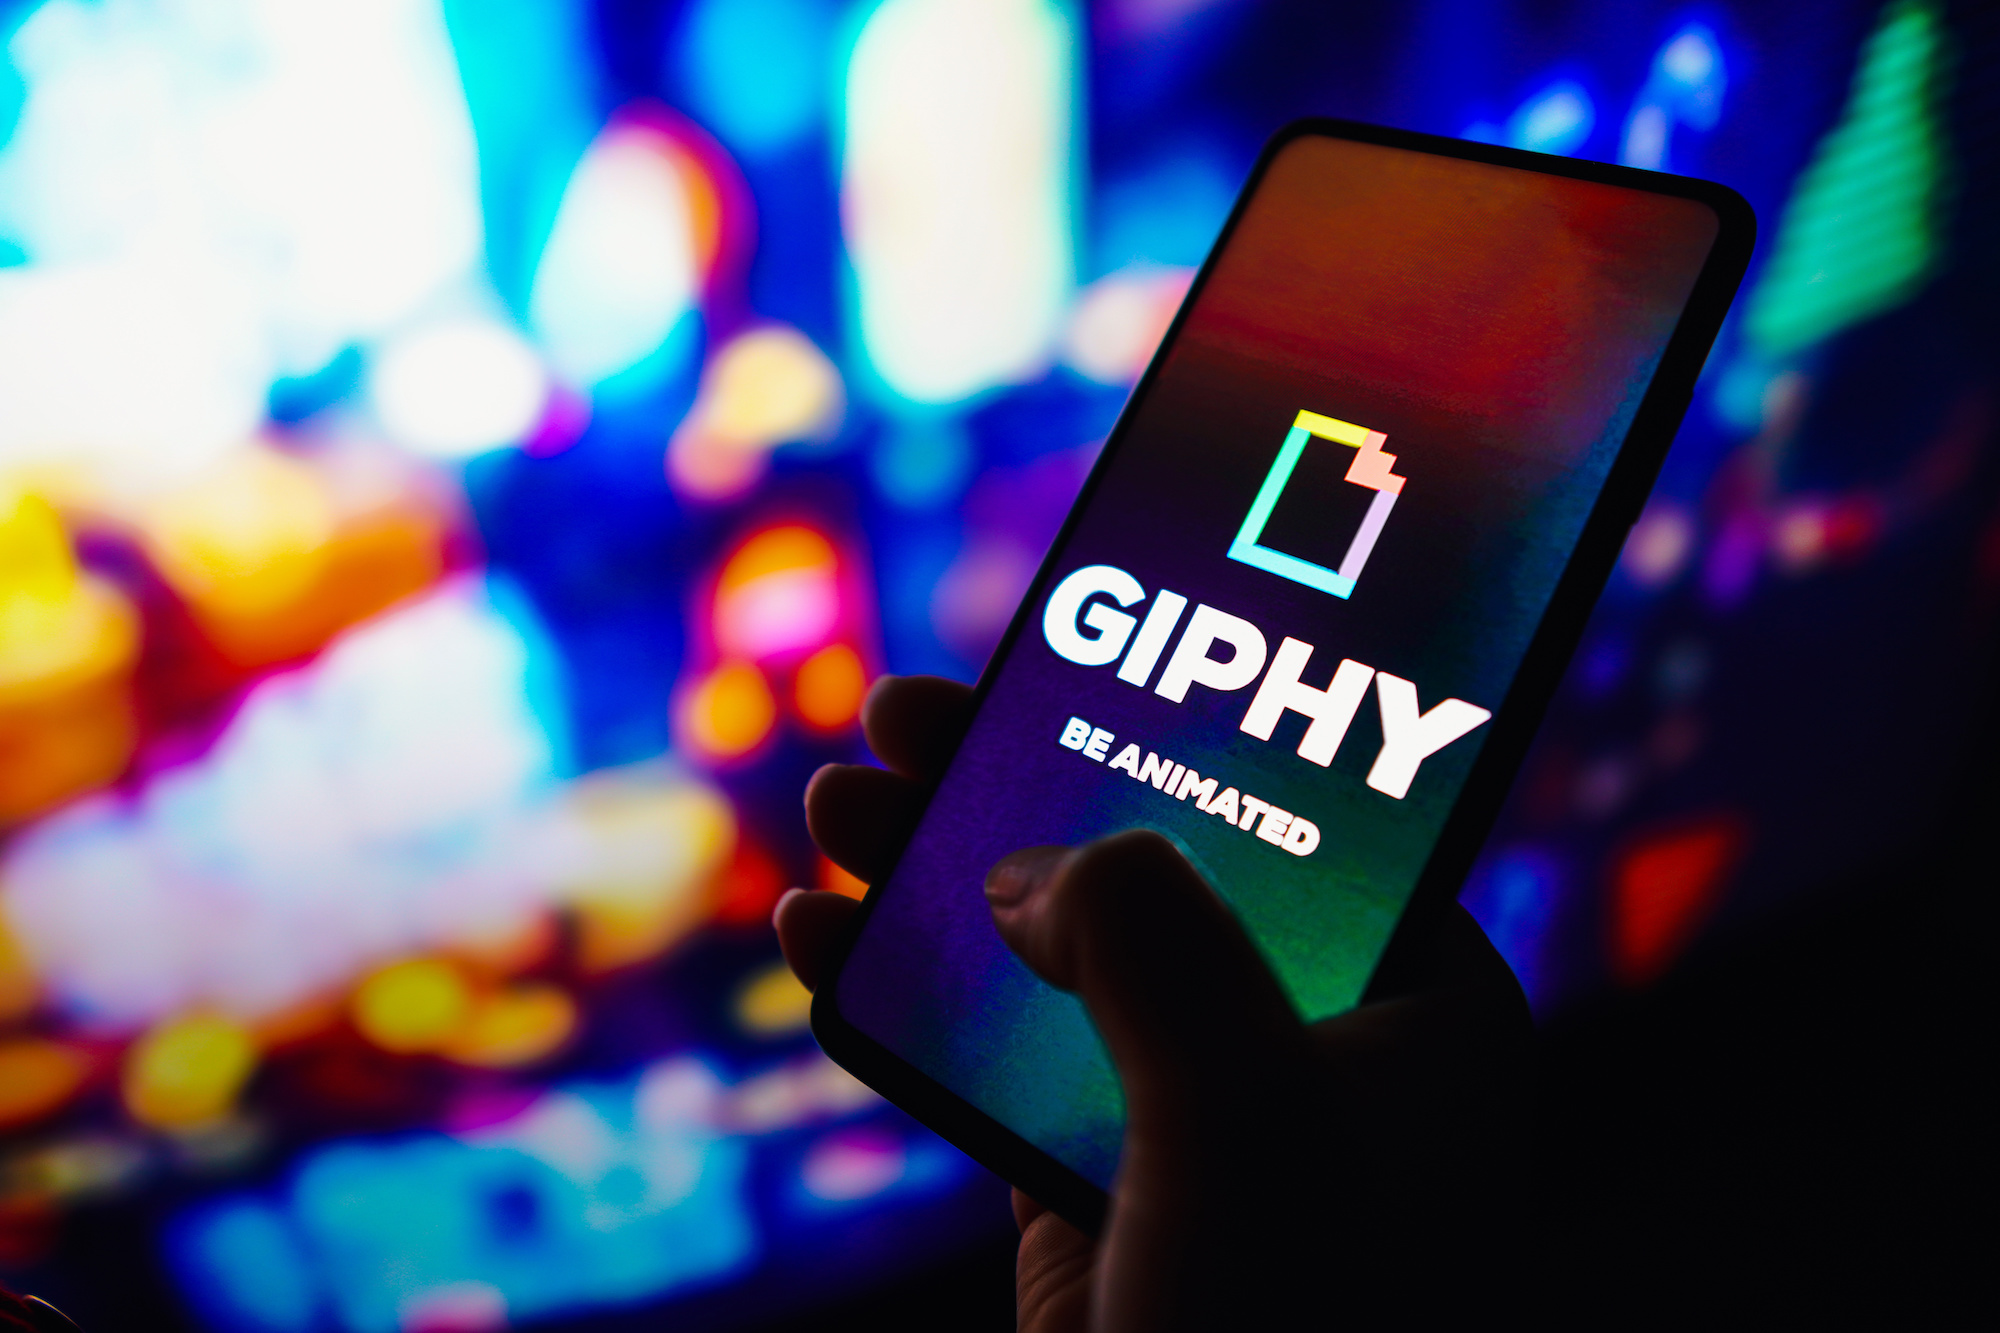 How to Add a GIF to Giphy